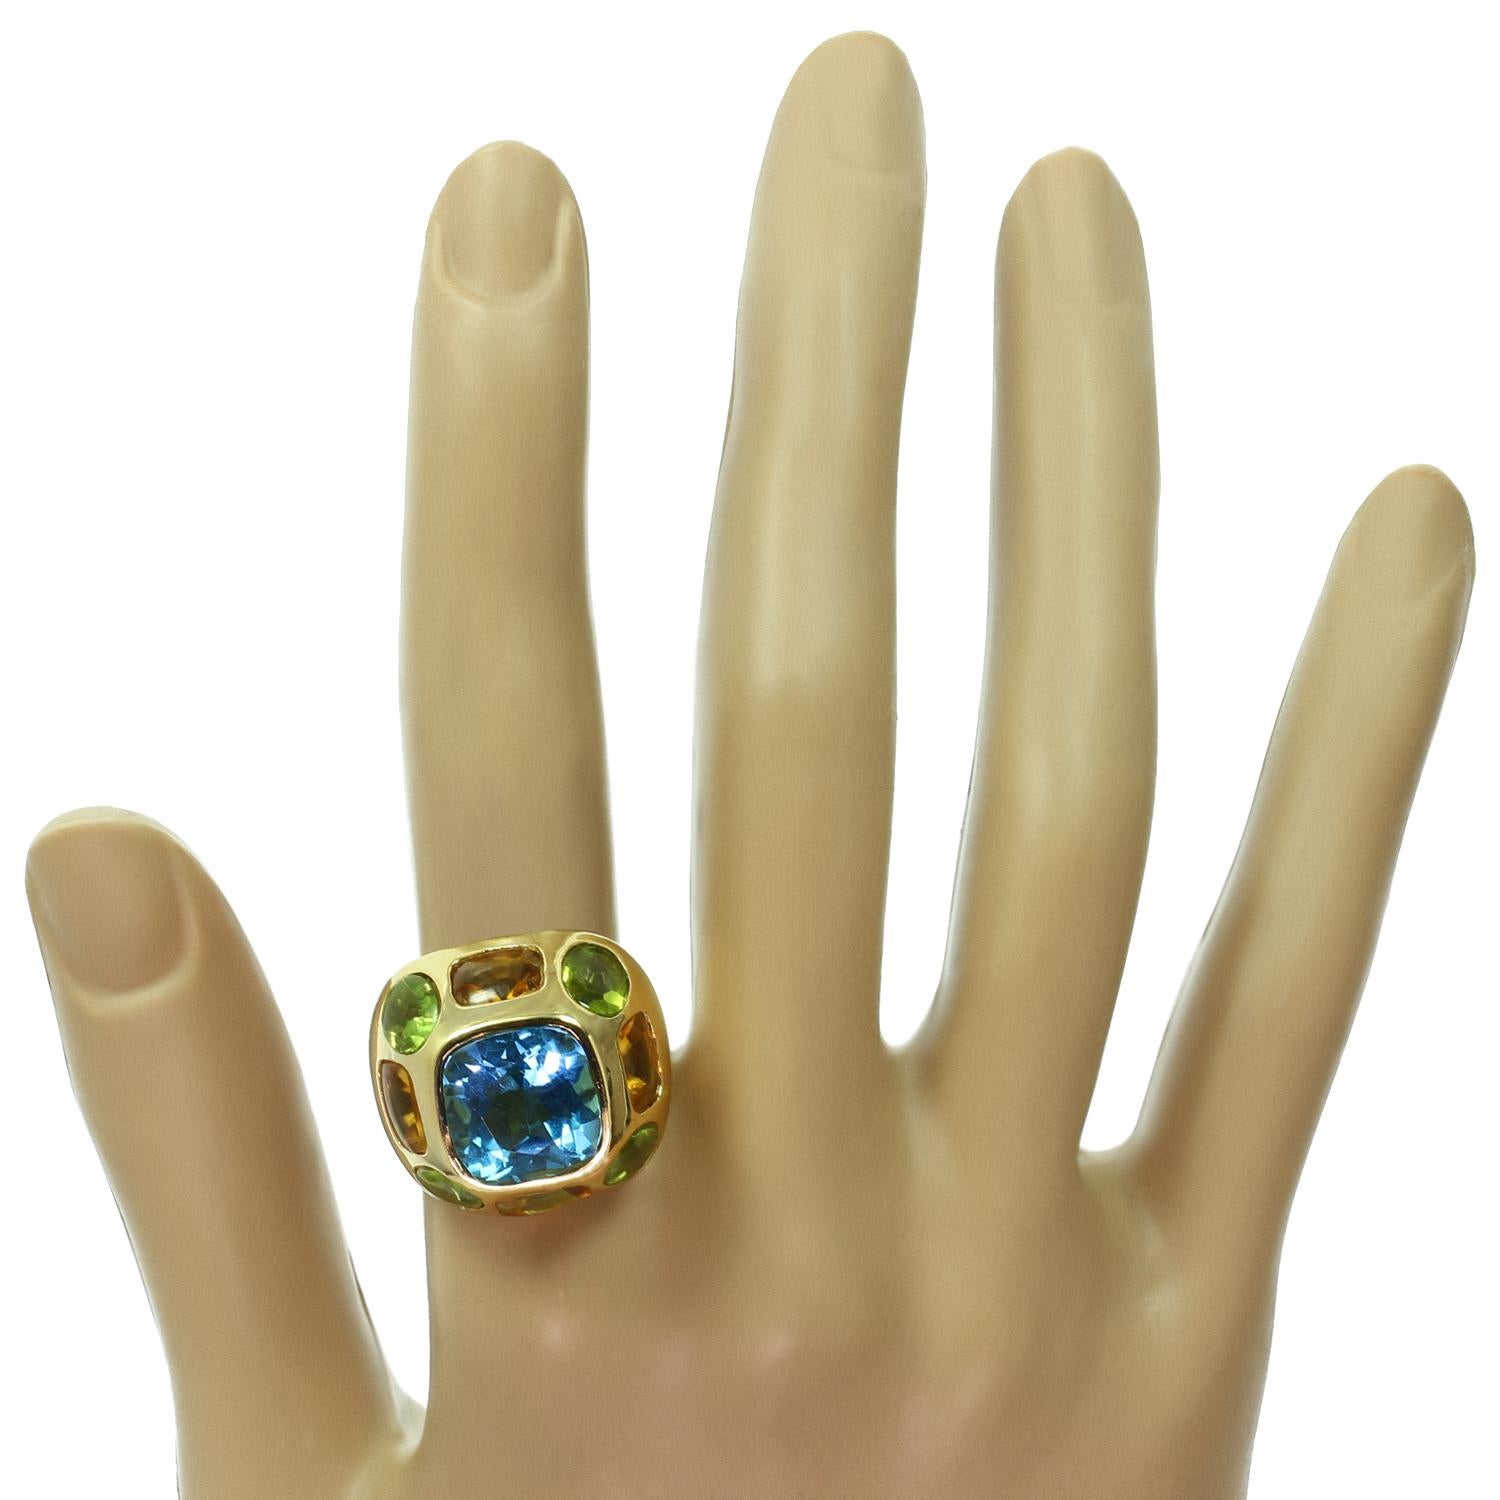 This gorgeous dome ring, Inspired by Chanel's Coco Baroque collection, is crafted in 18k yellow gold and set with a blue topaz center stone and peridot and citrine side stones. Made in United States circa 2000s. Measurements: 0.86